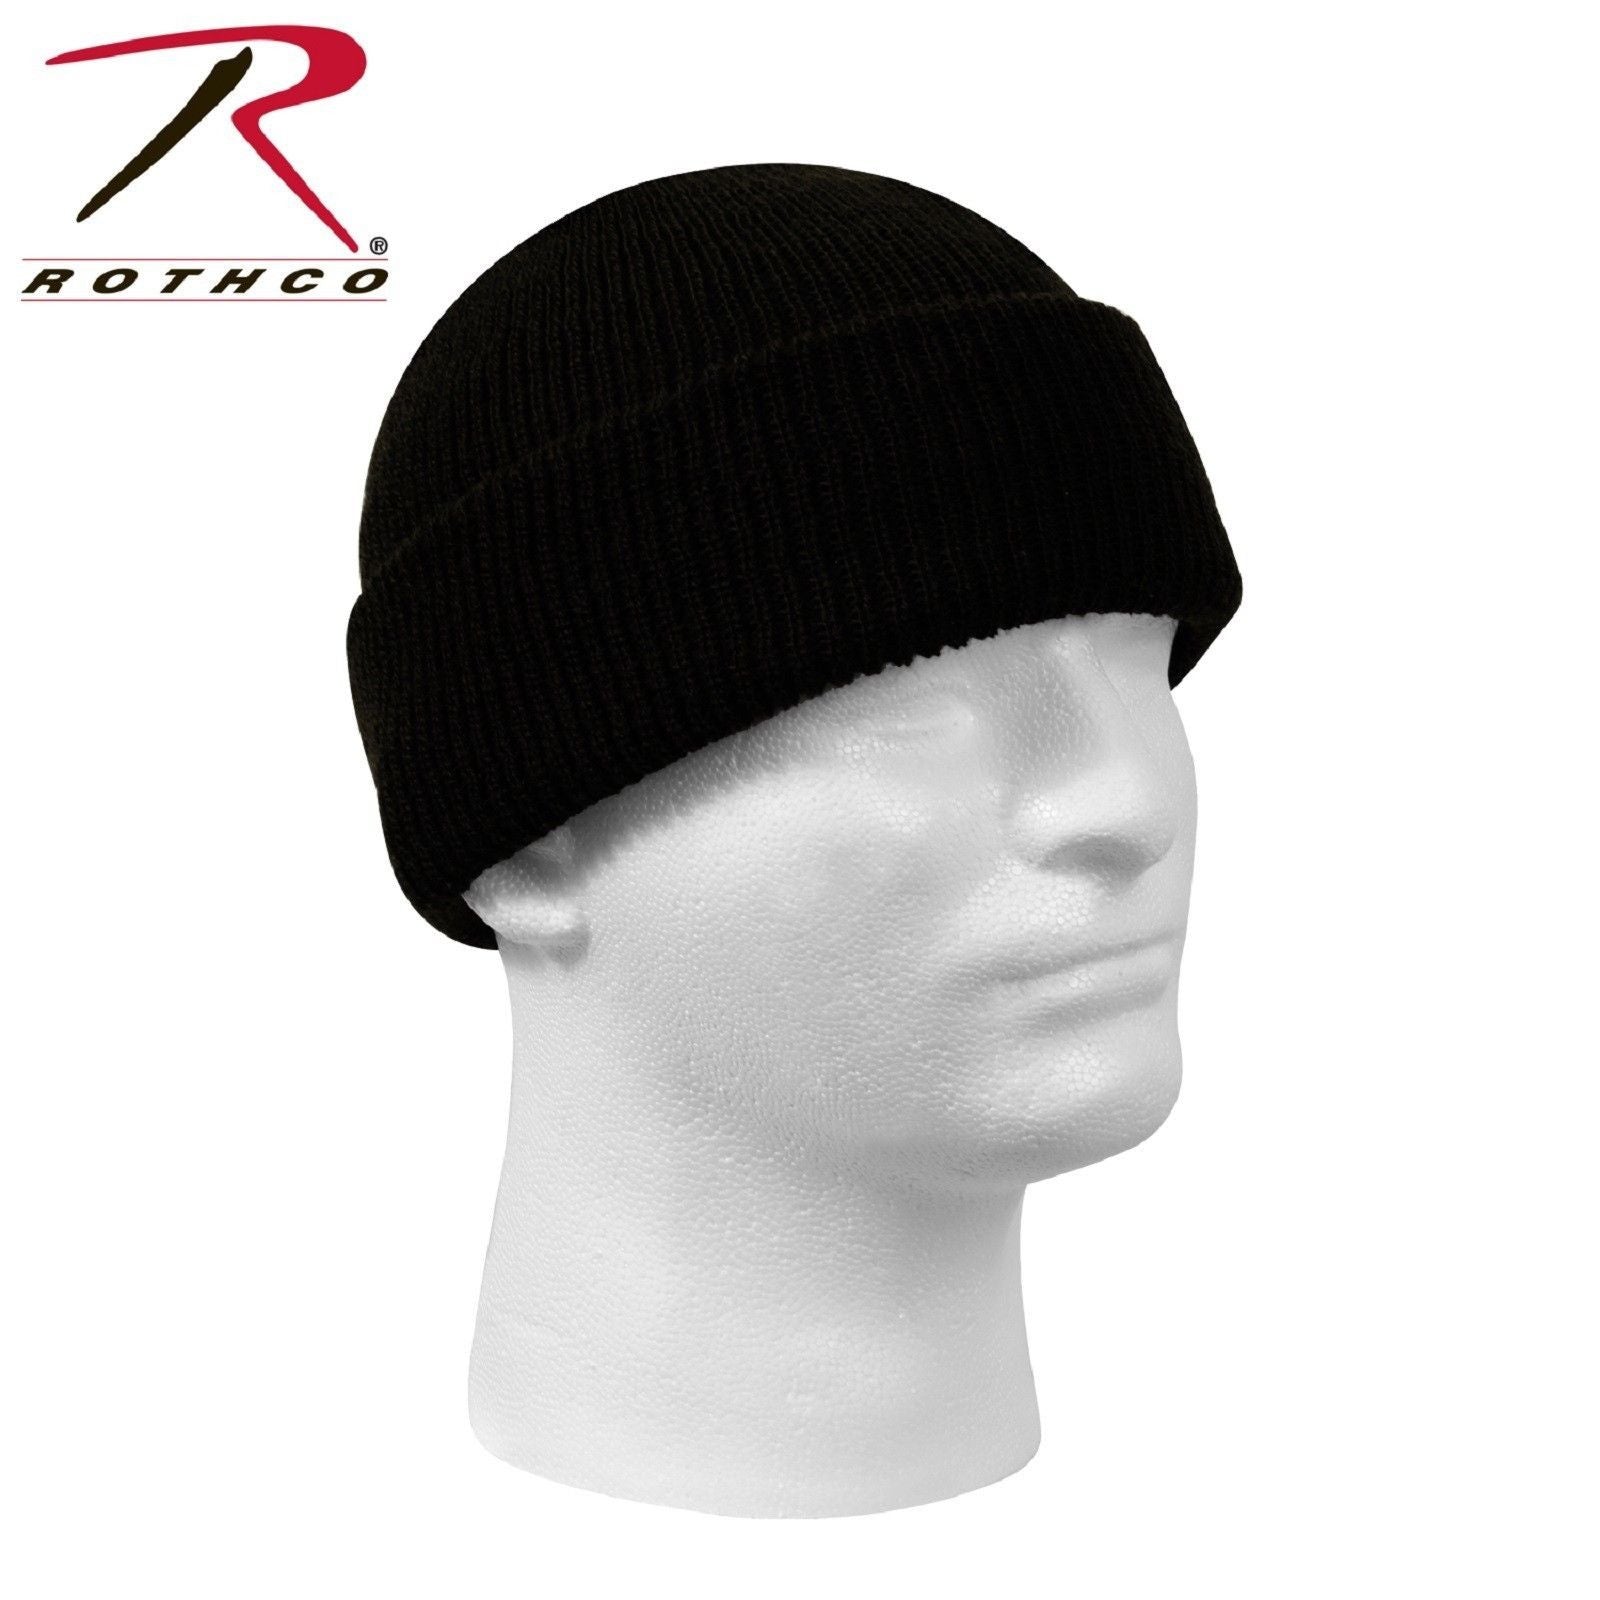 Black Winter Hat, Neck Warmer & Gloves 3 PACK Rothco Lot of 3 Cold